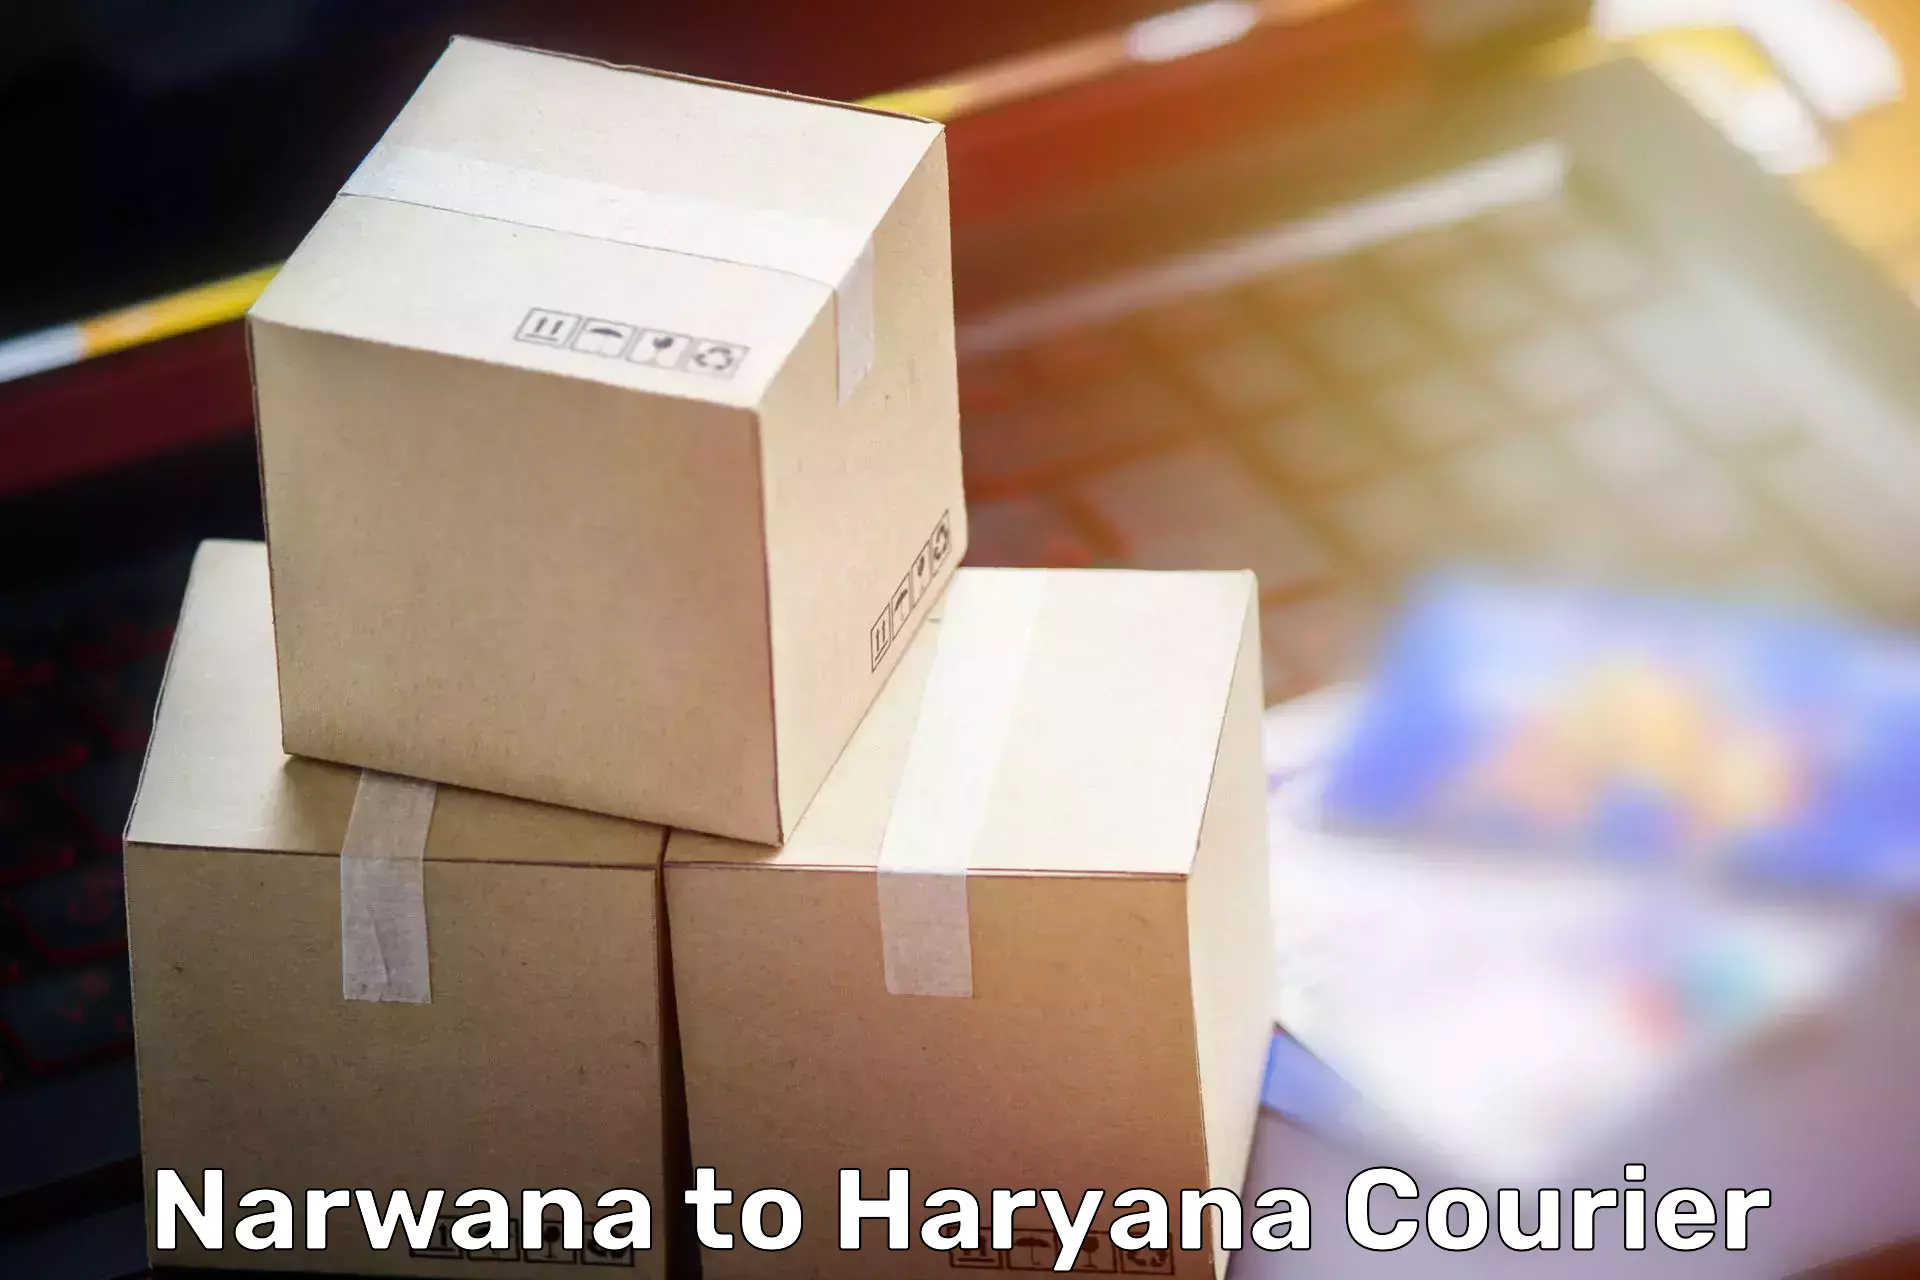 Hassle-free relocation in Narwana to Assandh